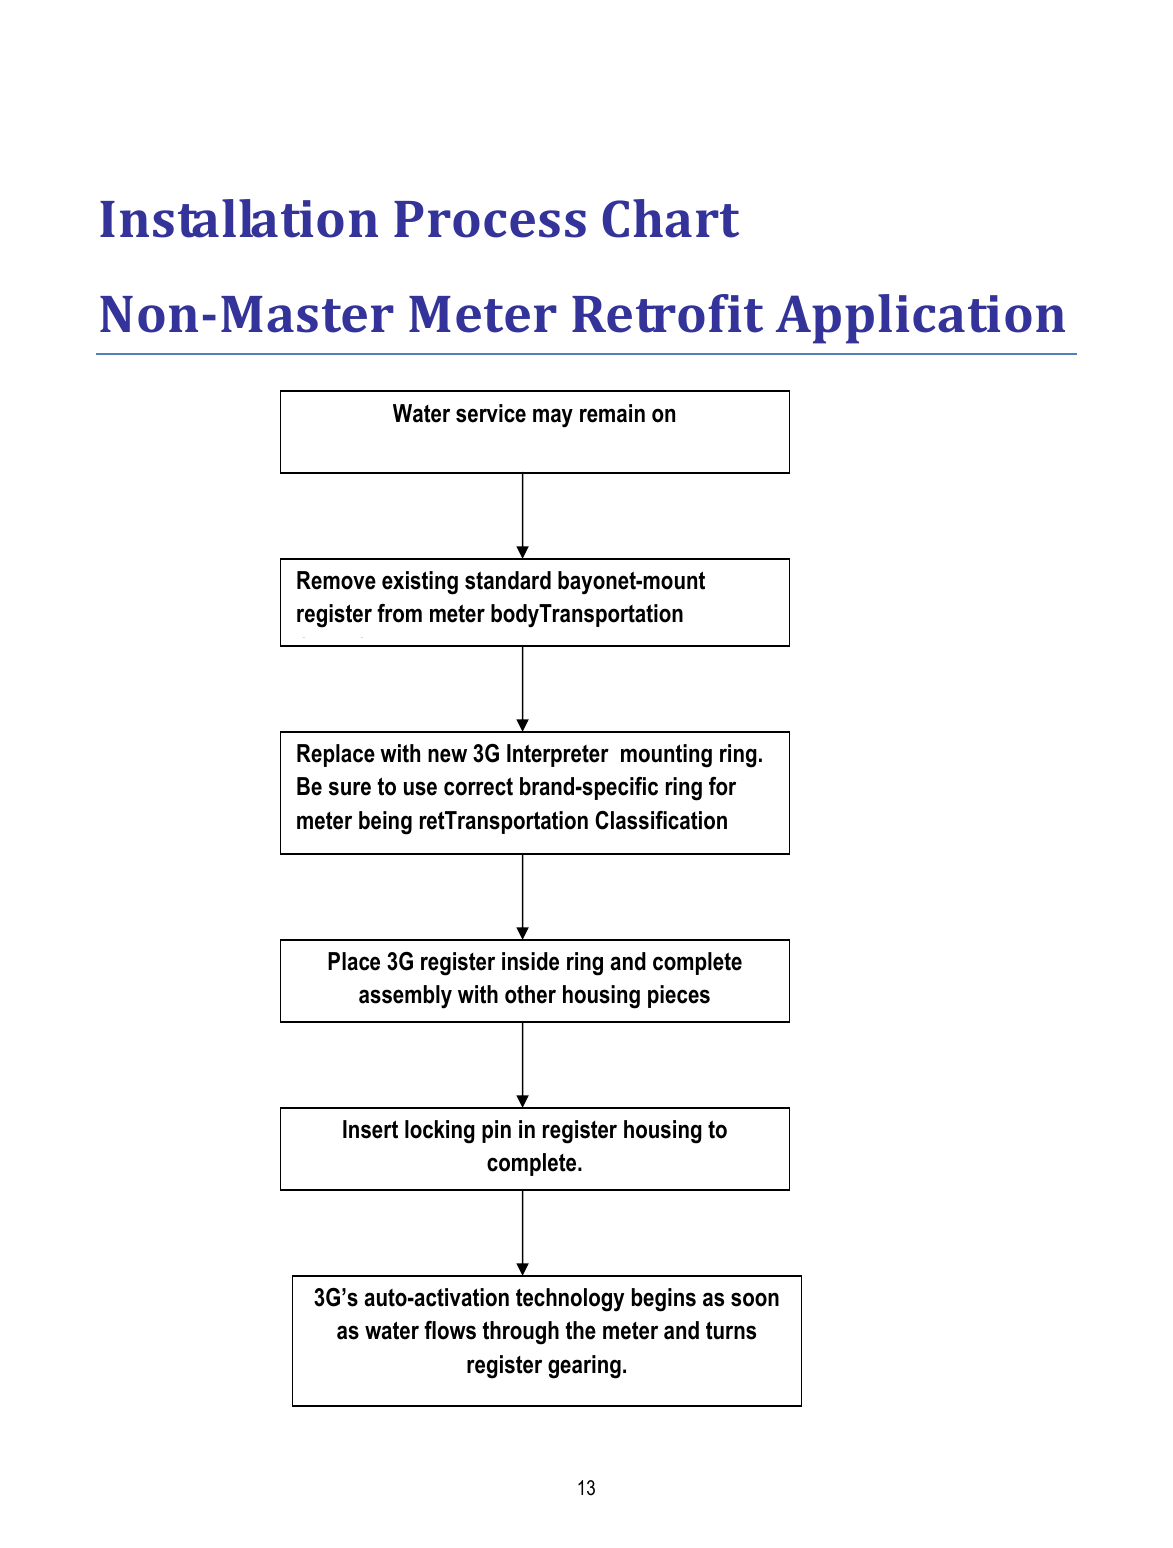  13   Installation Process Chart Non-Master Meter Retrofit Application             Water service may remain on Remove existing standard bayonet-mount register from meter bodyTransportation Classification Replace with new 3G Interpreter  mounting ring. Be sure to use correct brand-specific ring for meter being retTransportation Classification 3G’s auto-activation technology begins as soon as water flows through the meter and turns register gearing. Place 3G register inside ring and complete assembly with other housing pieces Insert locking pin in register housing to complete. 